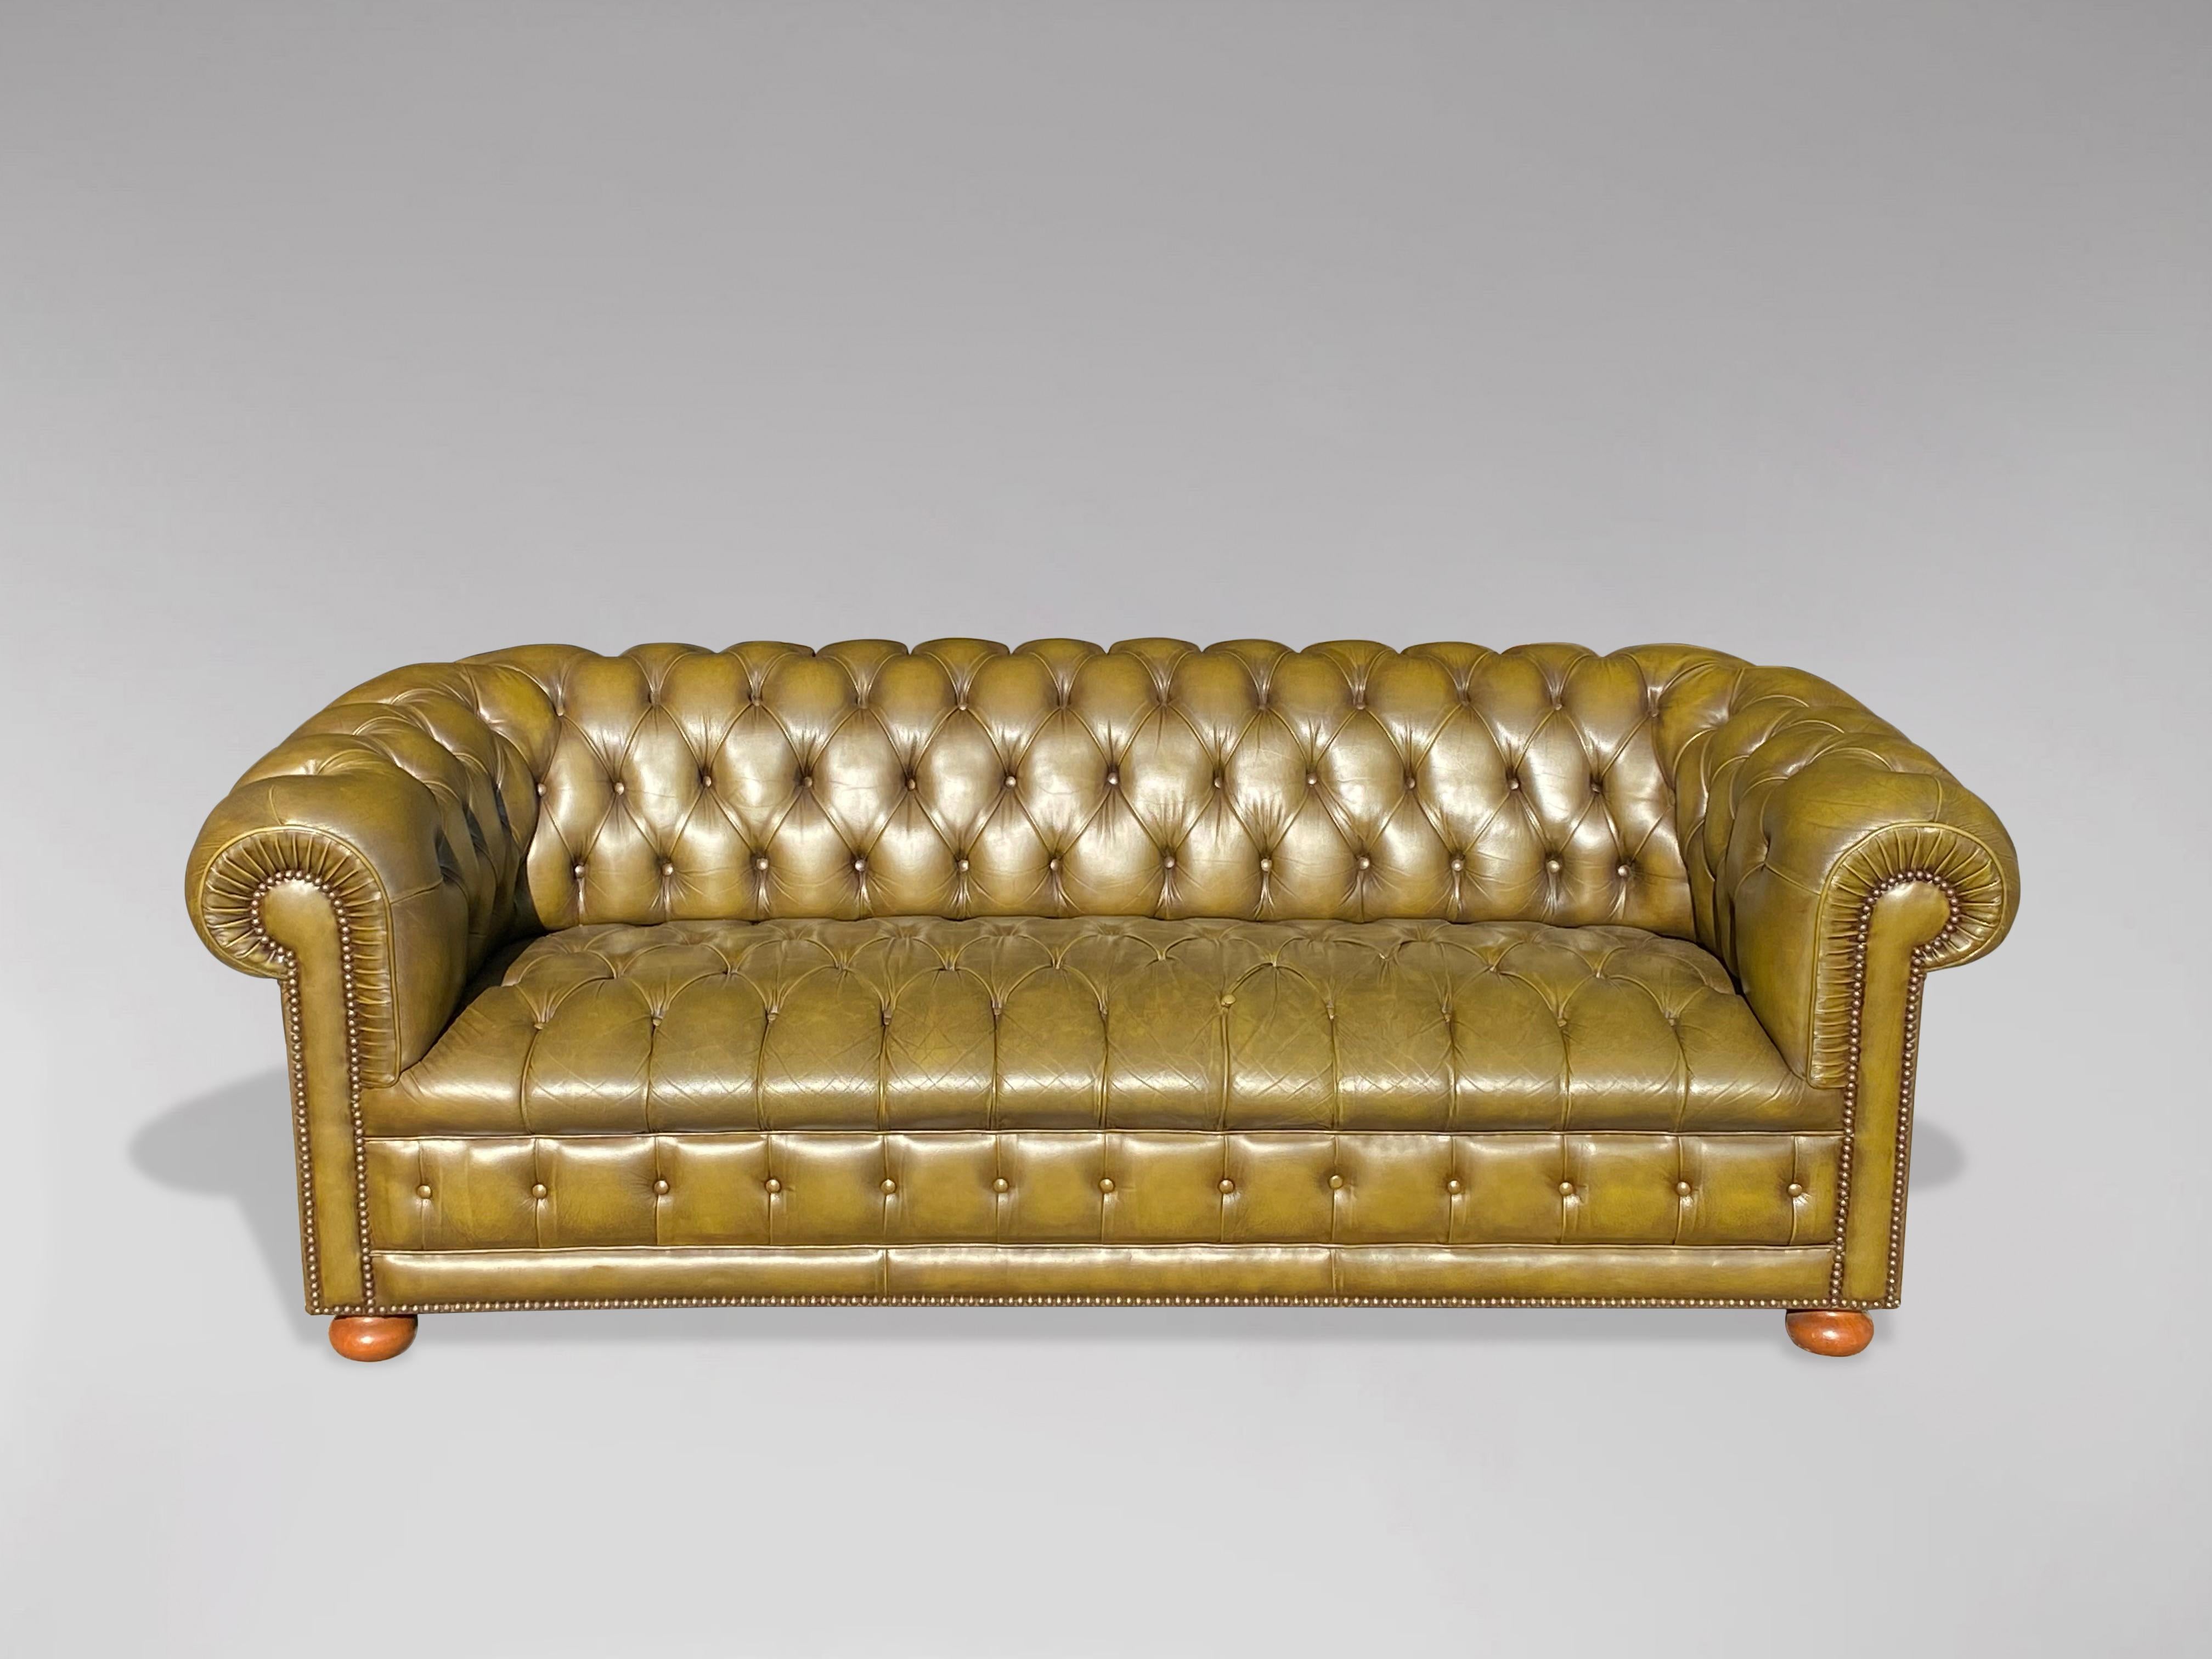 British 20th Century Three Piece Green Leather Chesterfield Suite For Sale